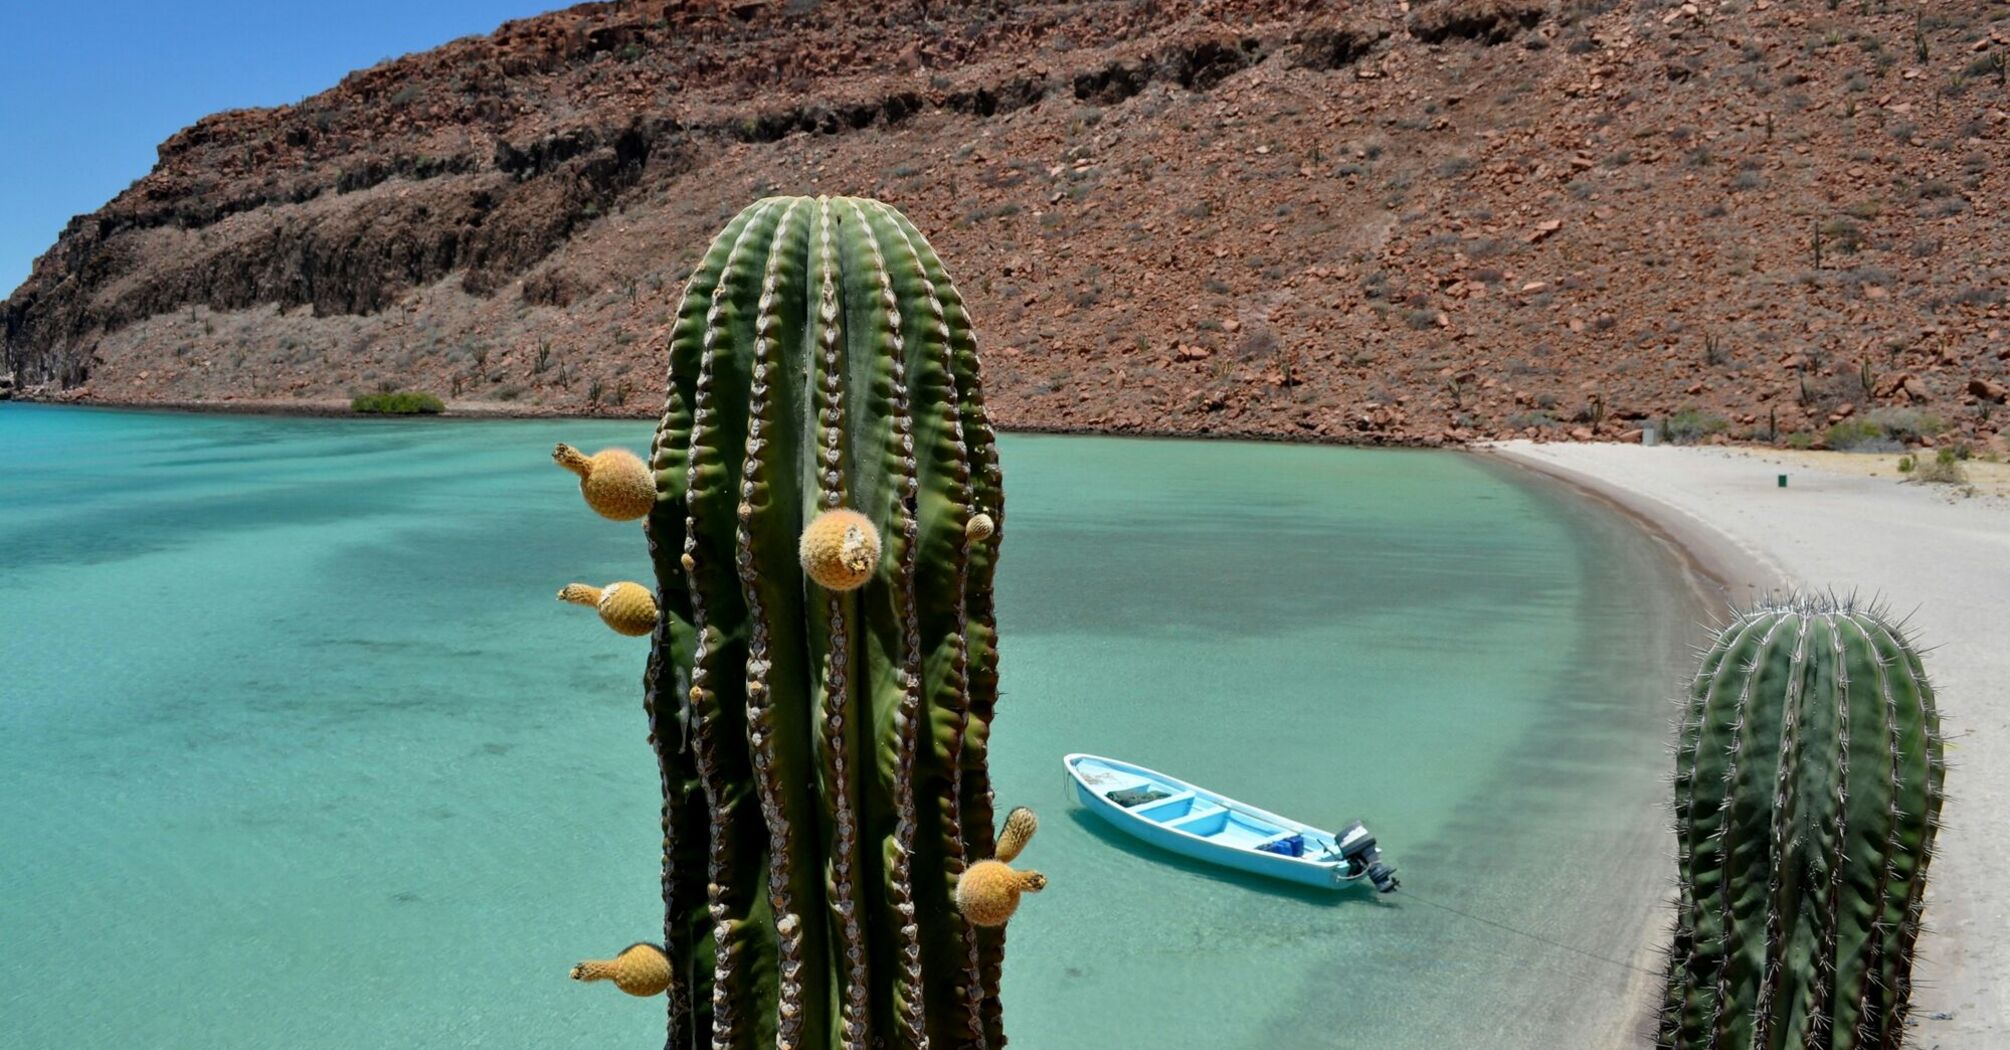 Green cactus near body of water during daytime